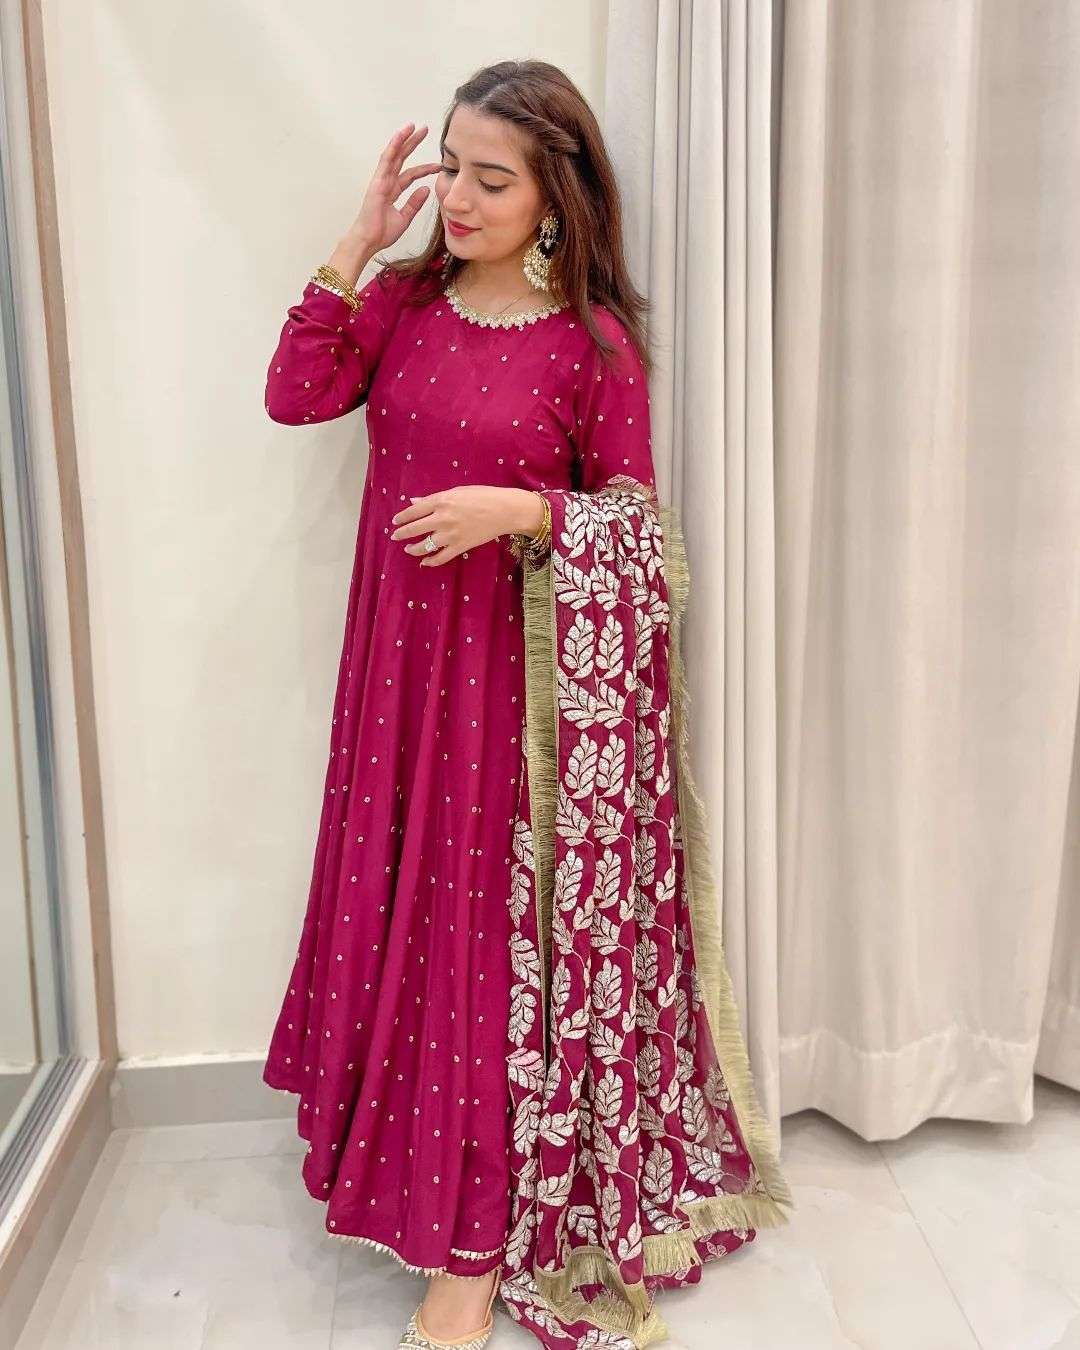 Cotton Embroidery Gown In Rani Pink Colour - GW3210966